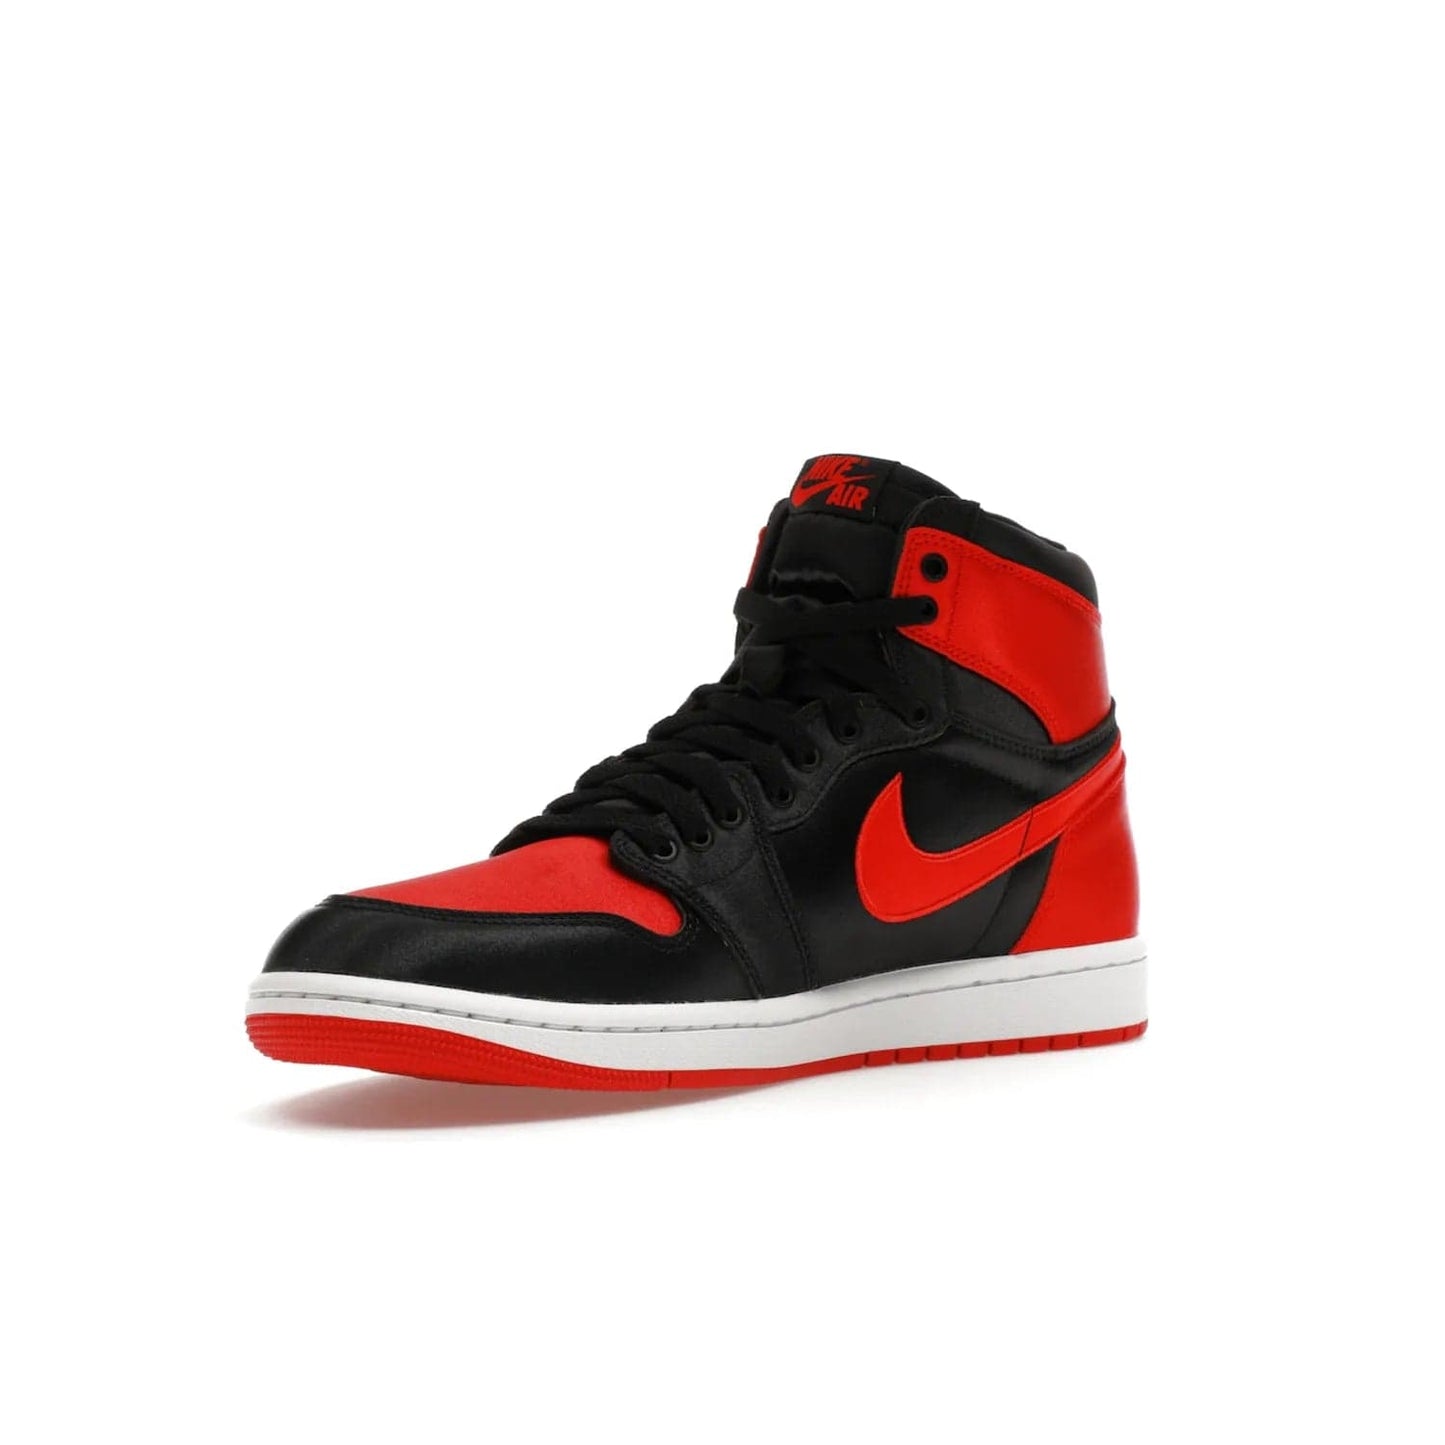 Jordan 1 Retro High OG Satin Bred (Women's) - Image 15 - Only at www.BallersClubKickz.com - Introducing the Jordan 1 Retro High OG Satin Bred (Women's). Luxe satin finish, contrasting hues & classic accents. Trending sneakers symbolizing timelessness & heritage. Make a bold statement with this iconic shoe. Available October 4, 2023.